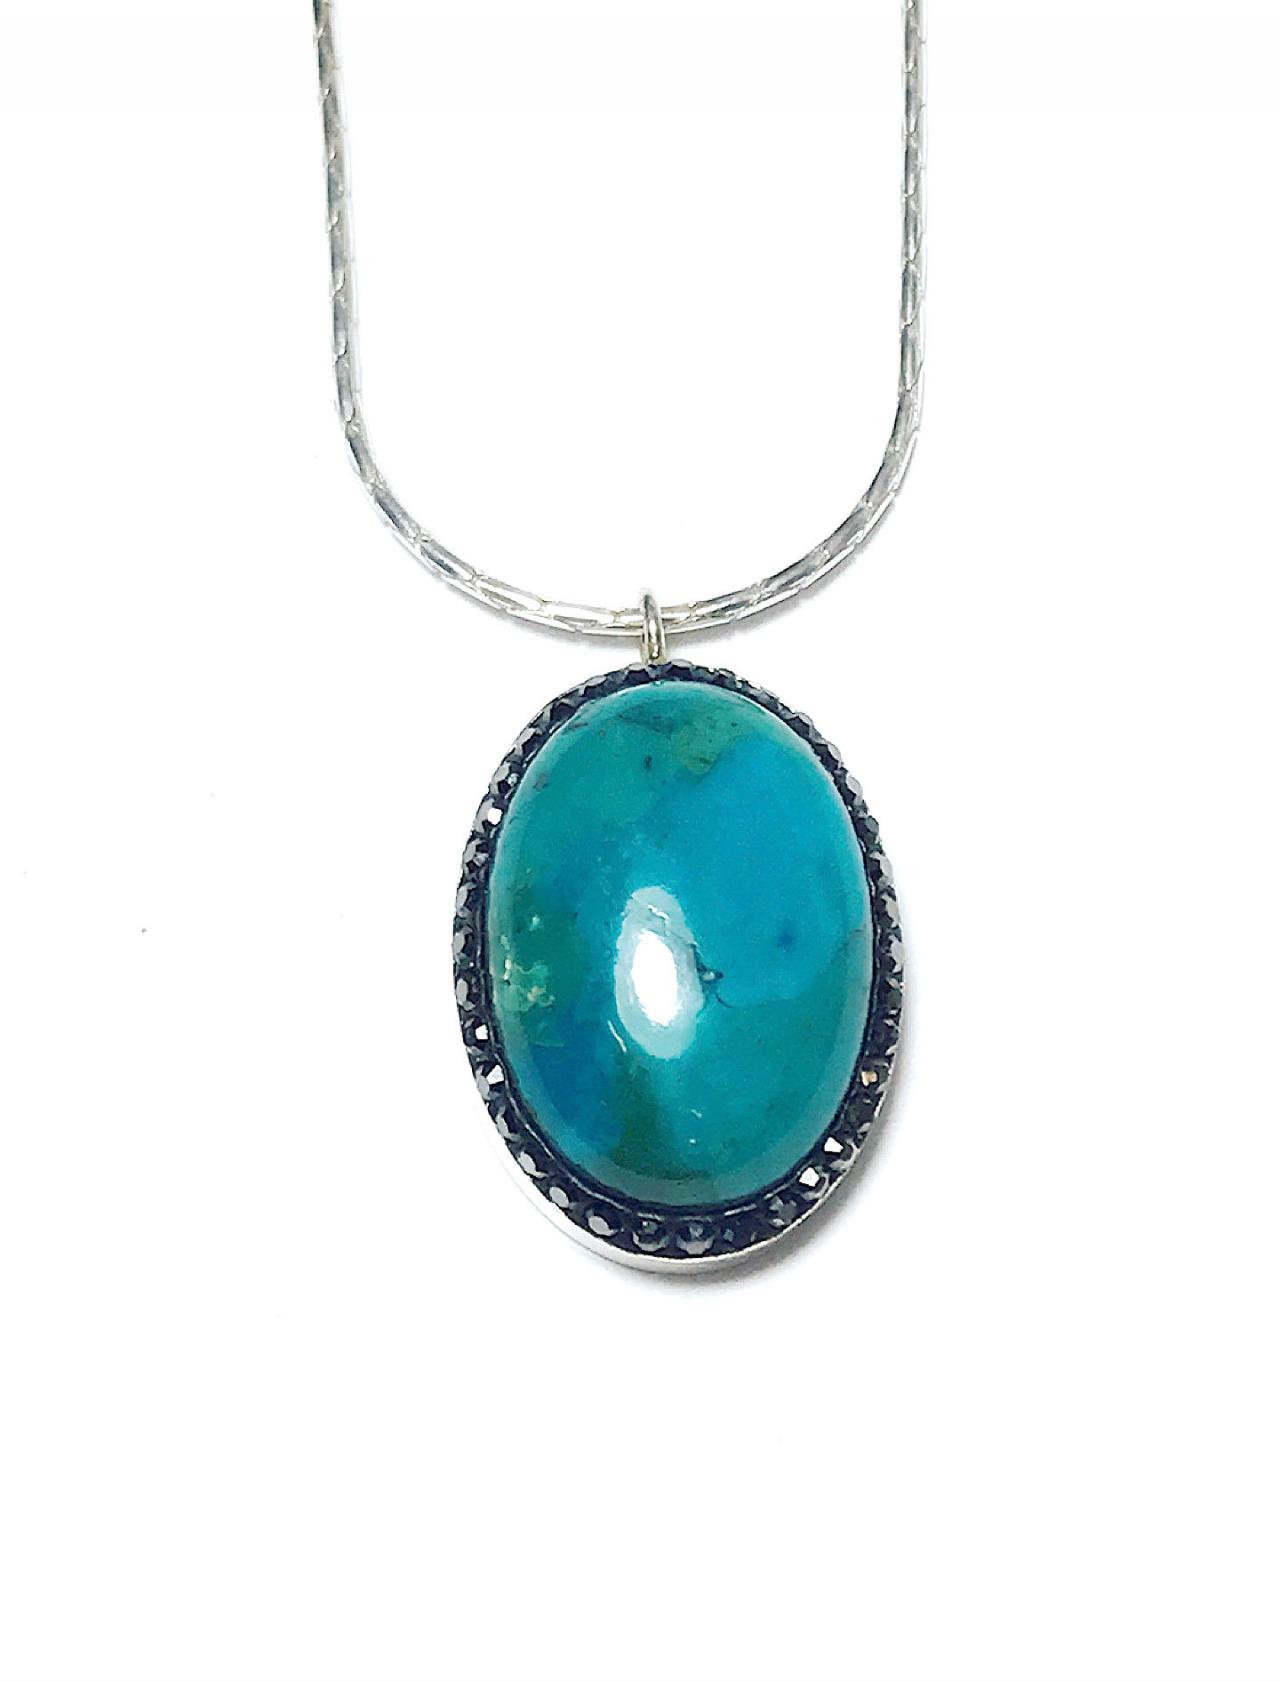 Turquoise - Silver 925 Pendant